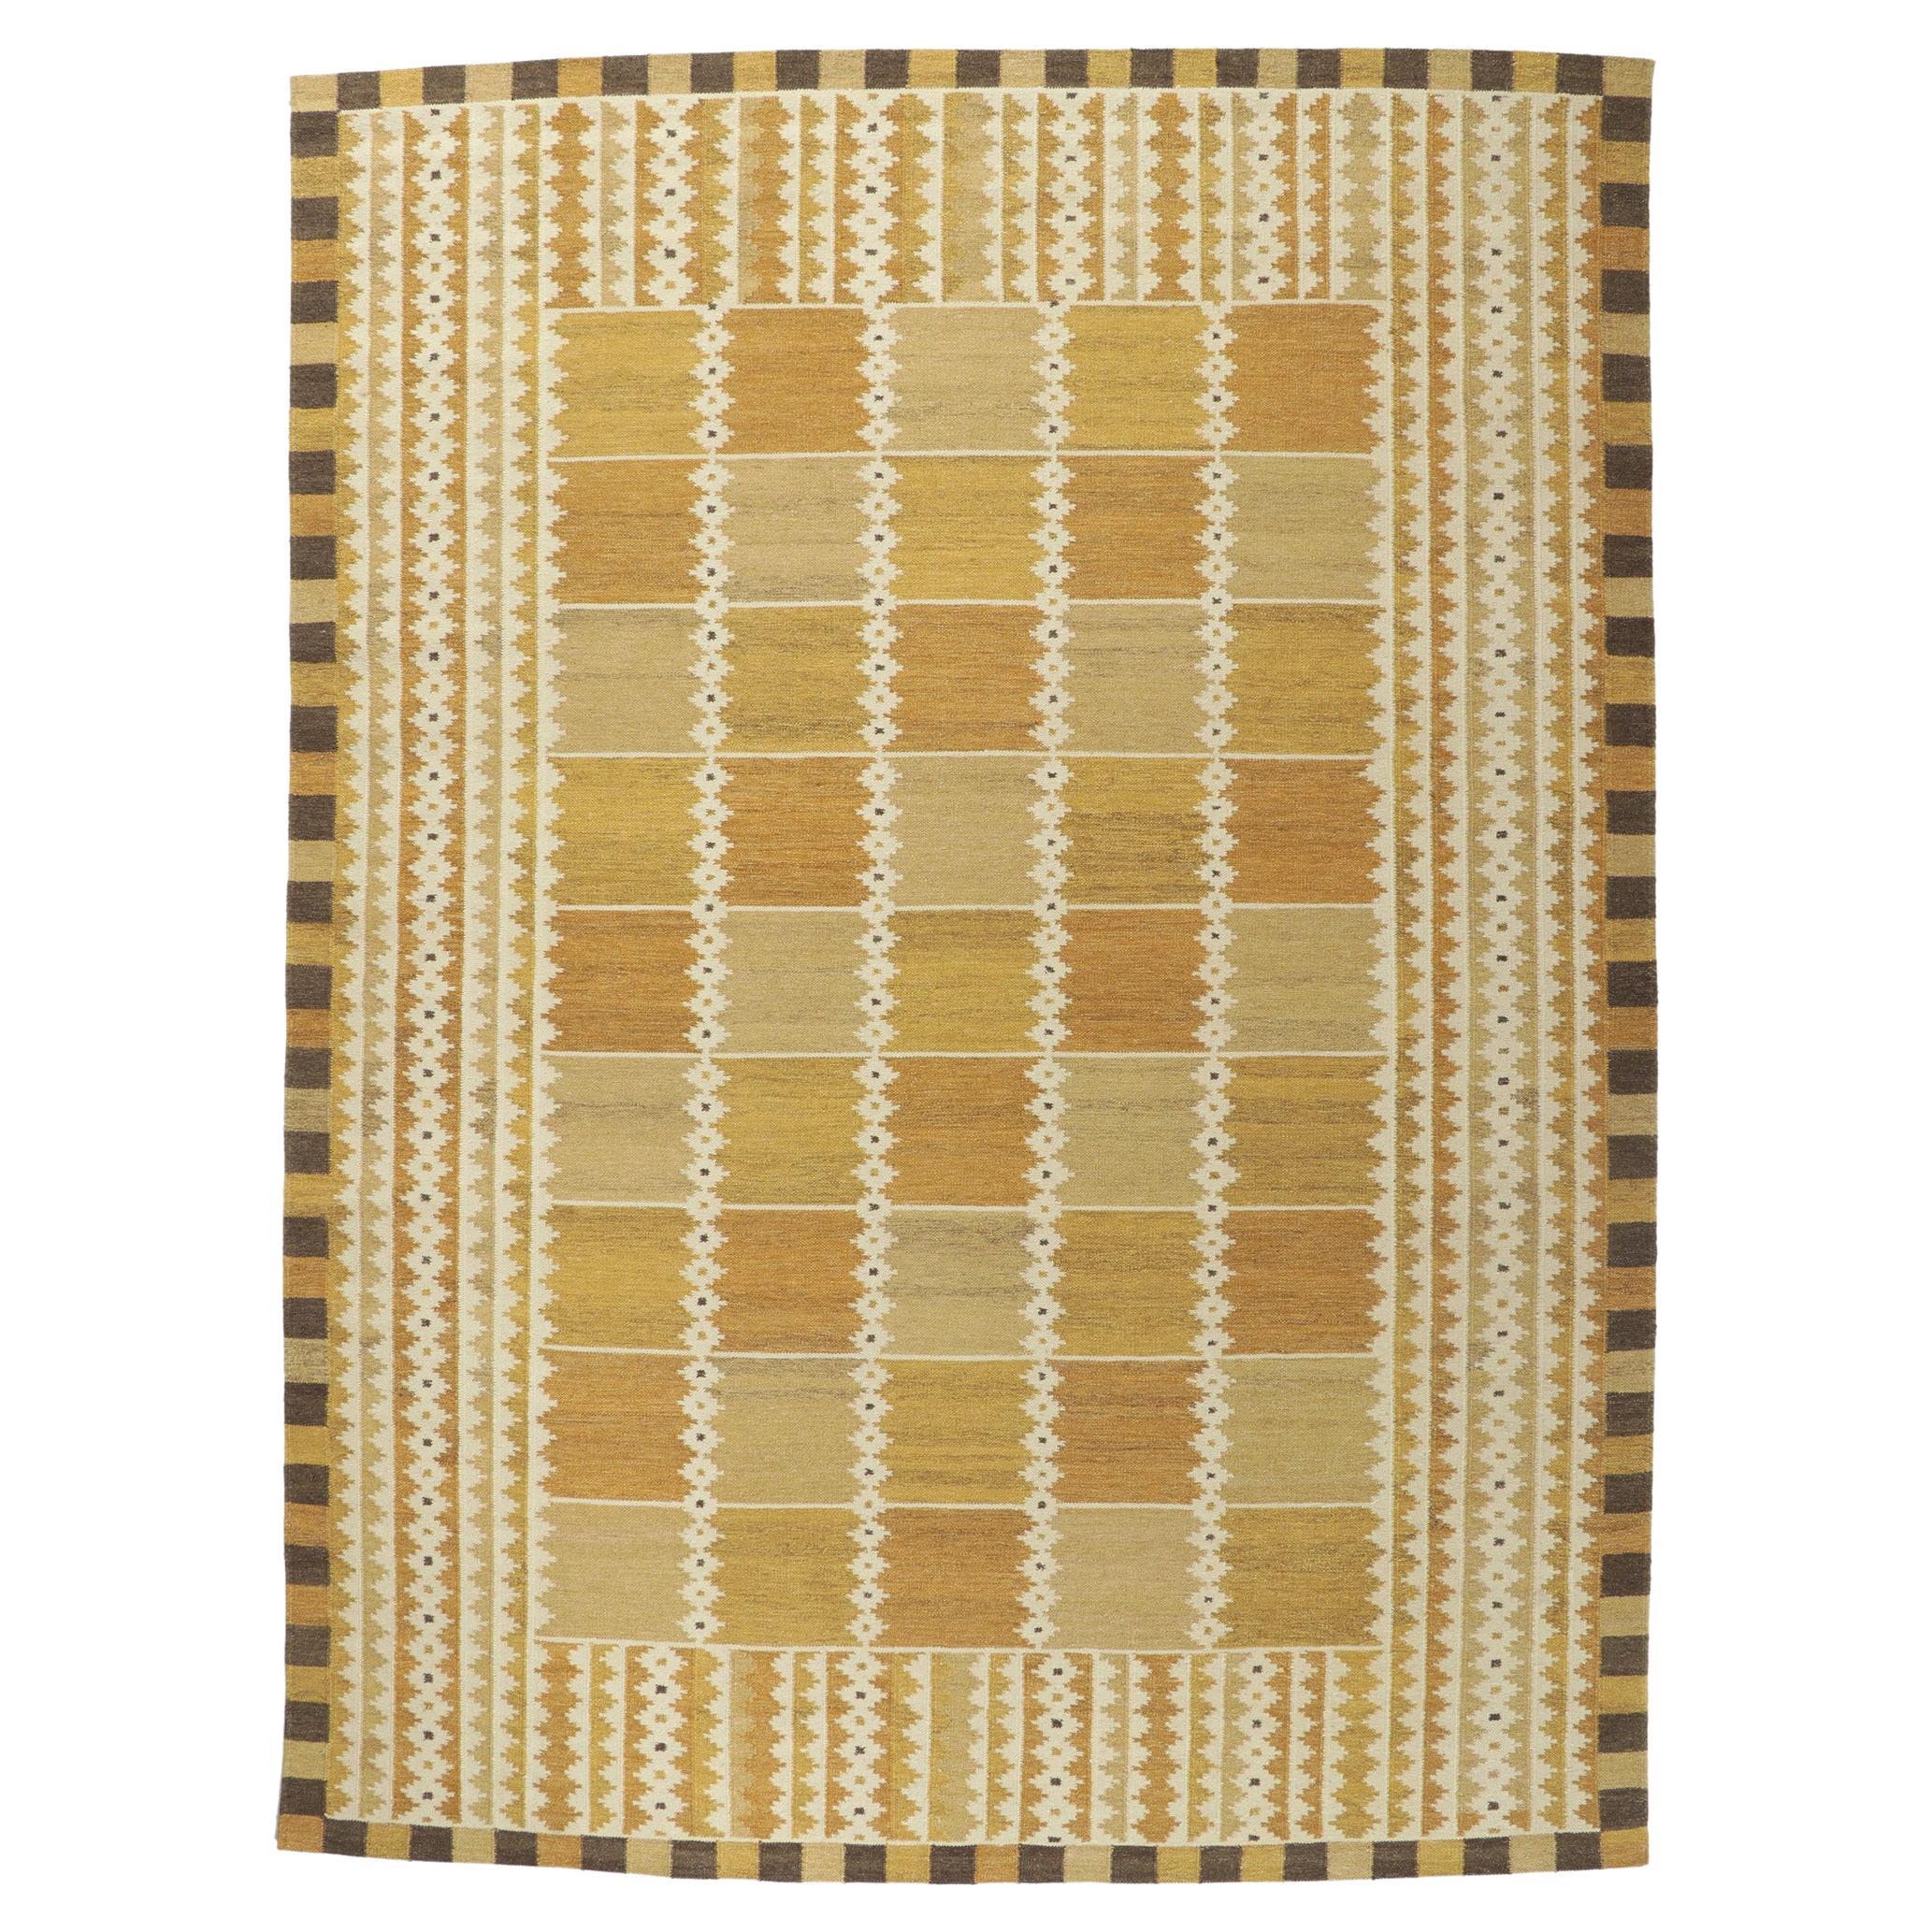 New Swedish Style Kilim Rug Inspired by Marianne Richter and Barbro Nilsson